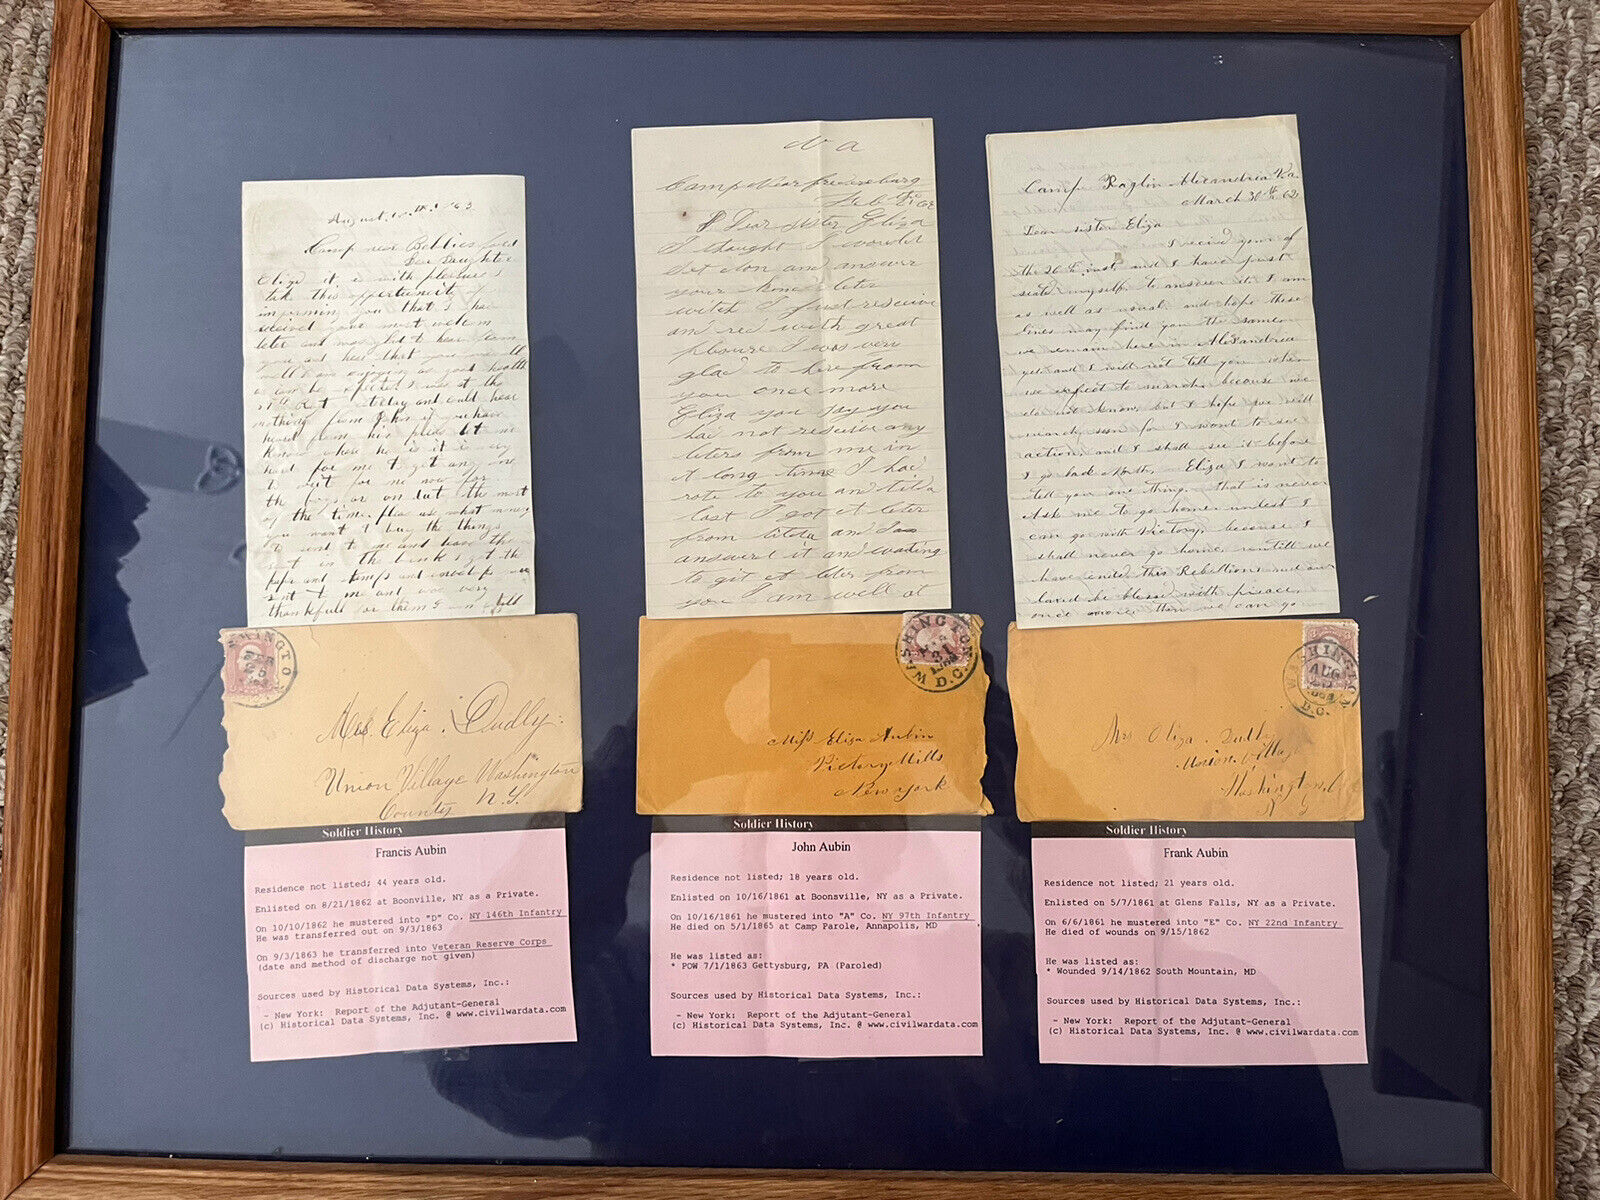 Three Civil War Letters Written by Father And two sons, (both sons died)